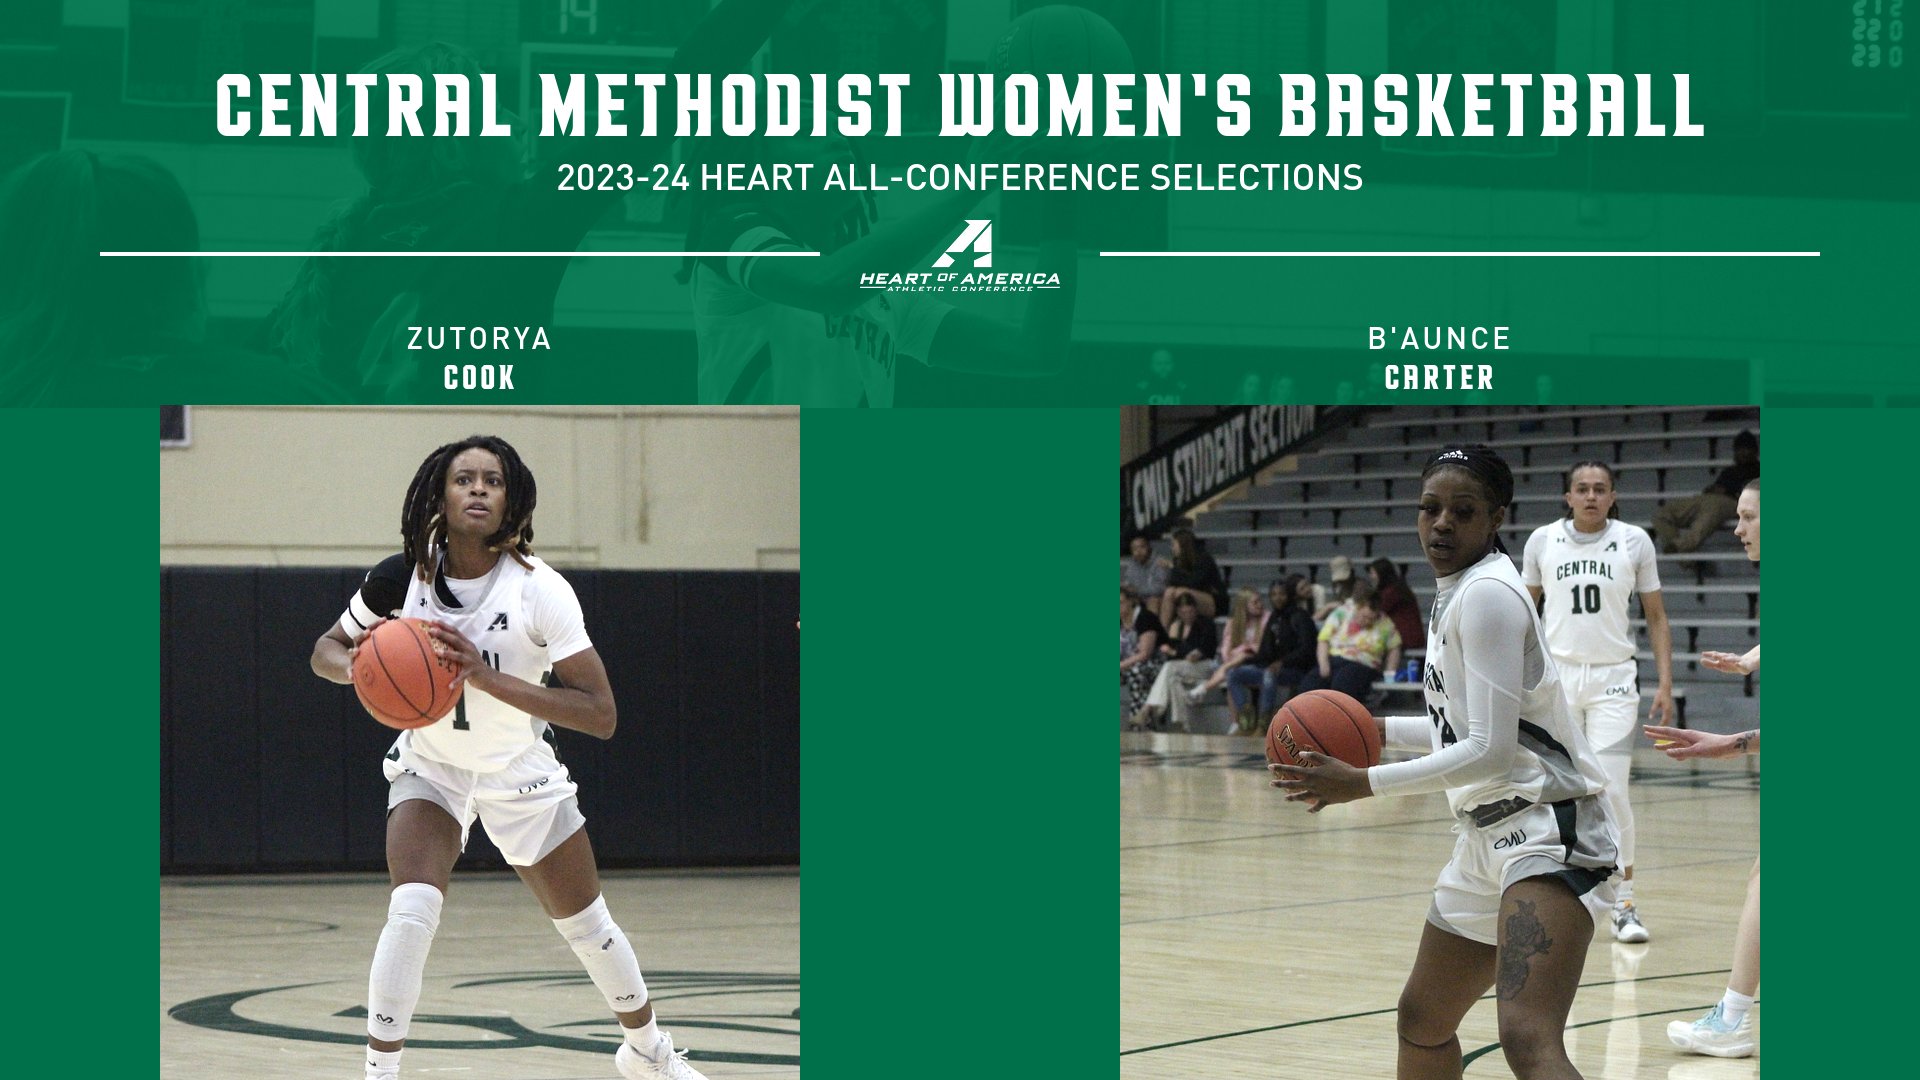 Two Eagles Earn All-Conference Honors; Cook Tabbed Defensive Player of the Year